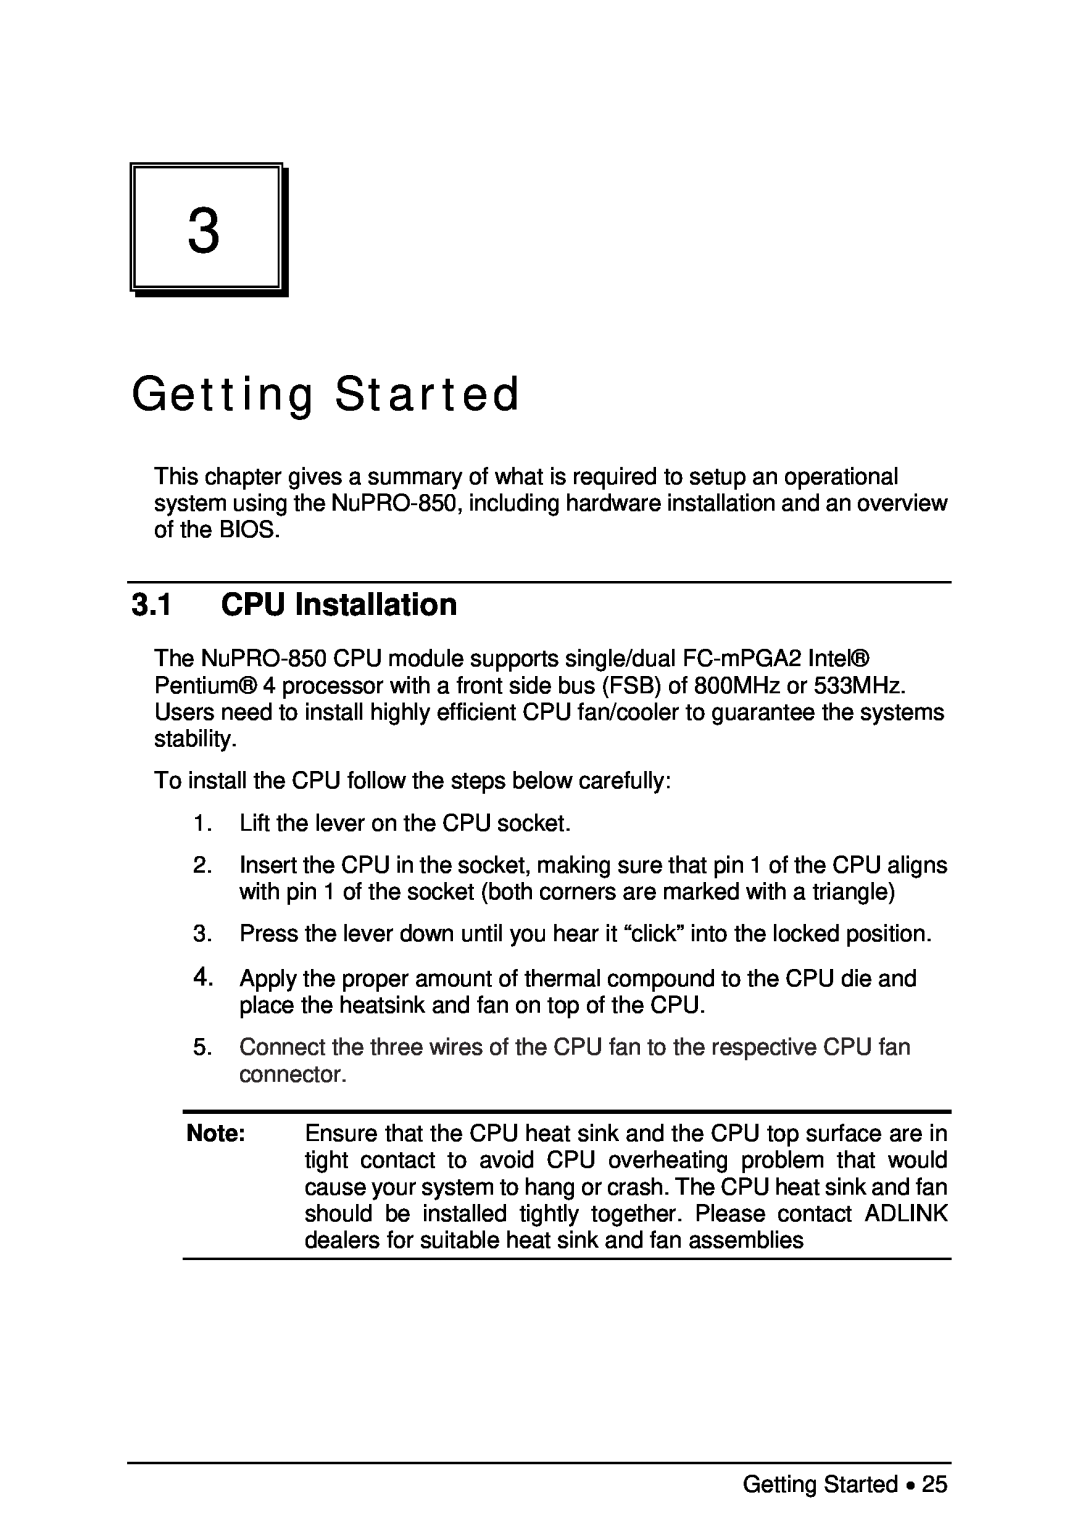 Intel NuPRO-850 user manual Getting Started, CPU Installation 